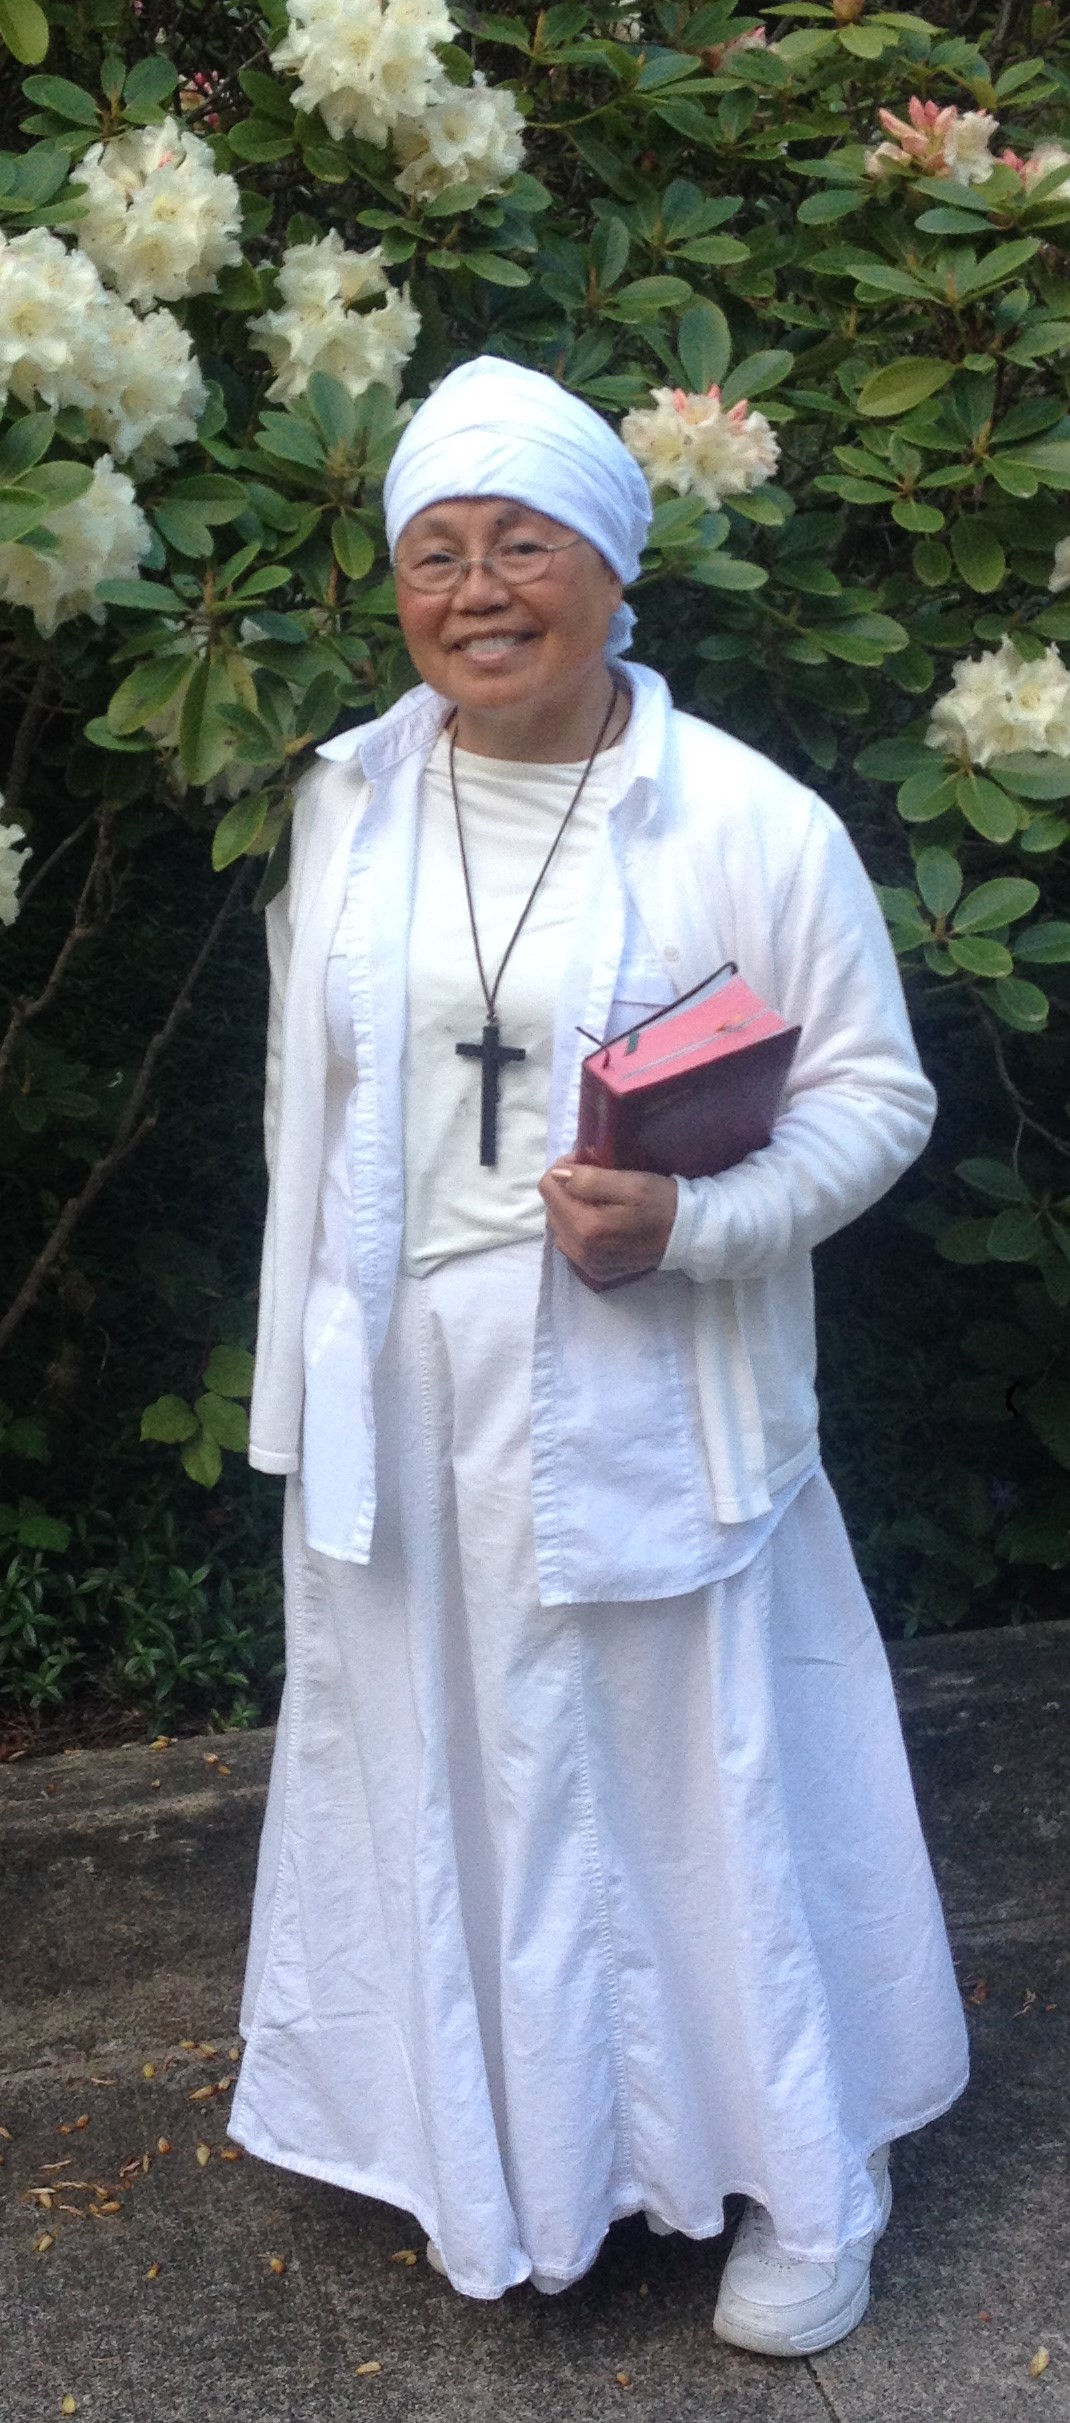 Sister Rose standing in front of white flowers